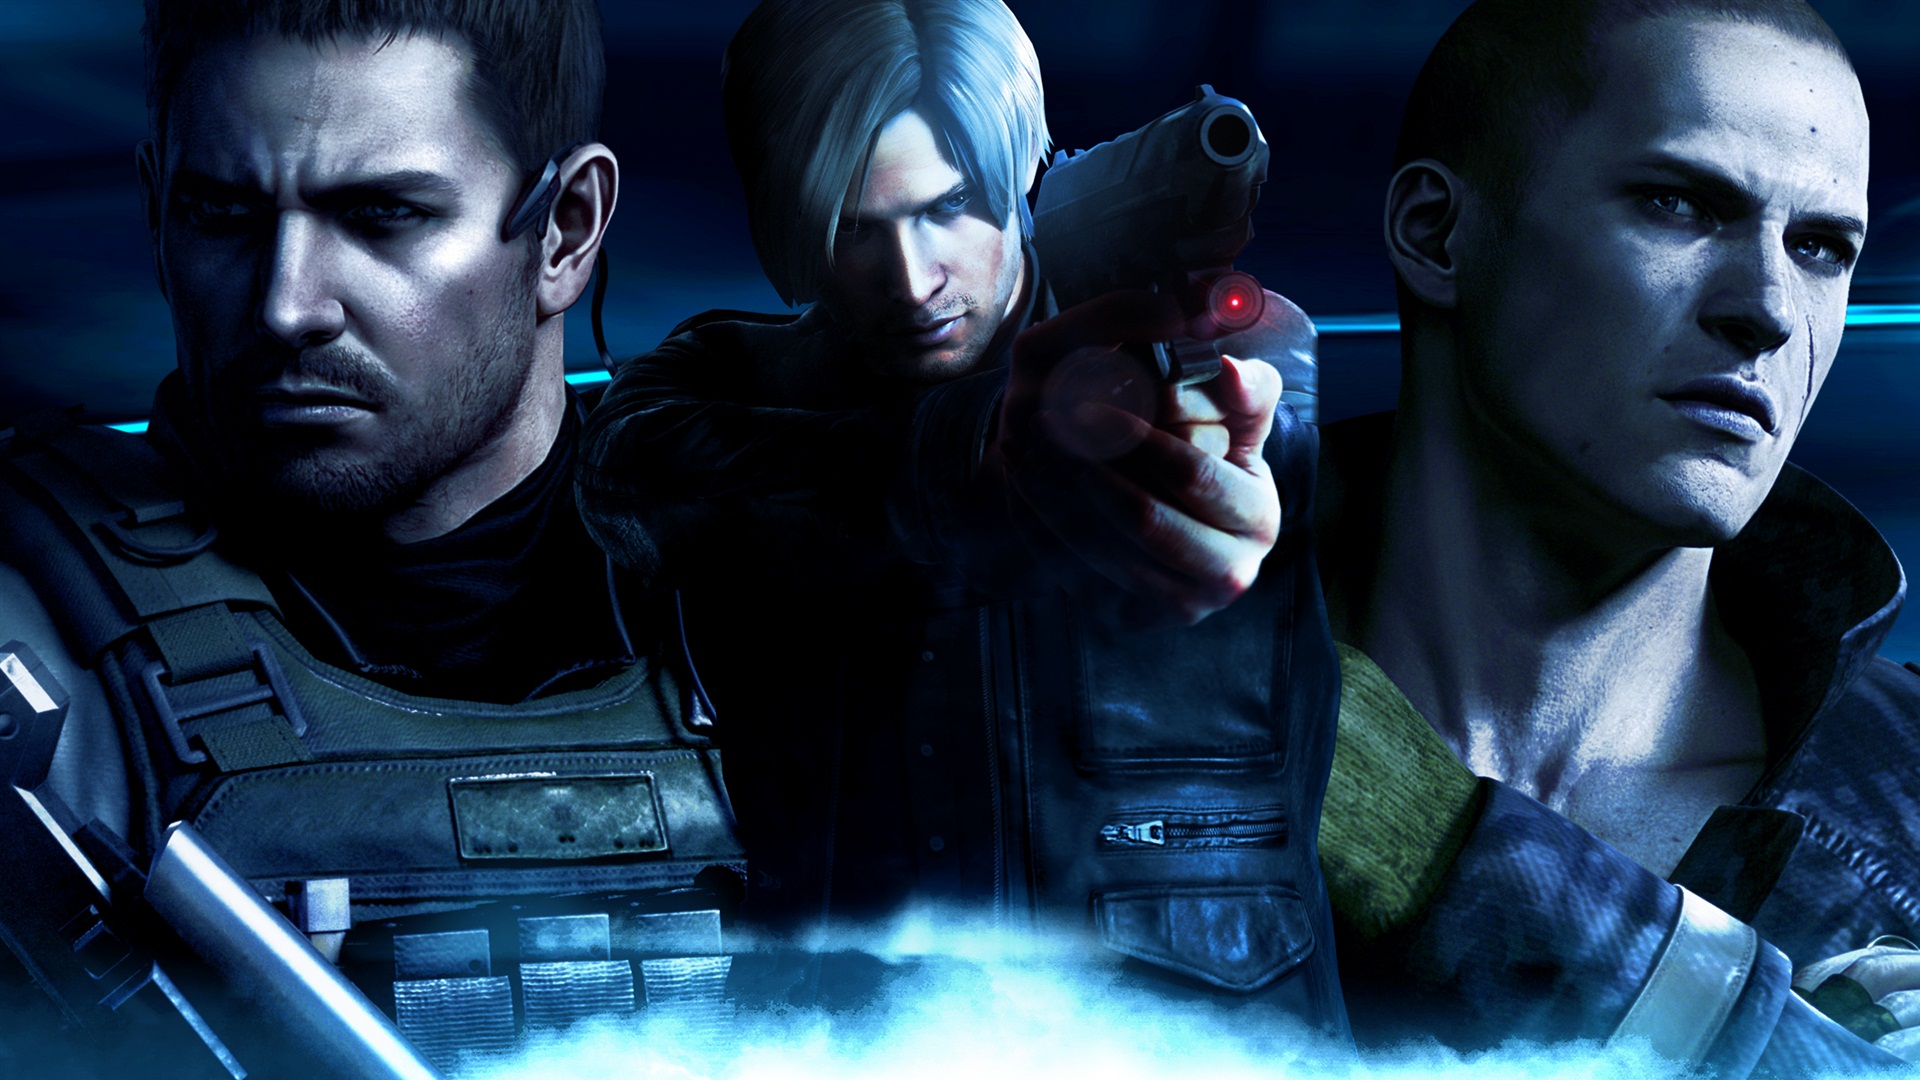 Resident Evil 6 HD game wallpapers #6 - 1920x1080